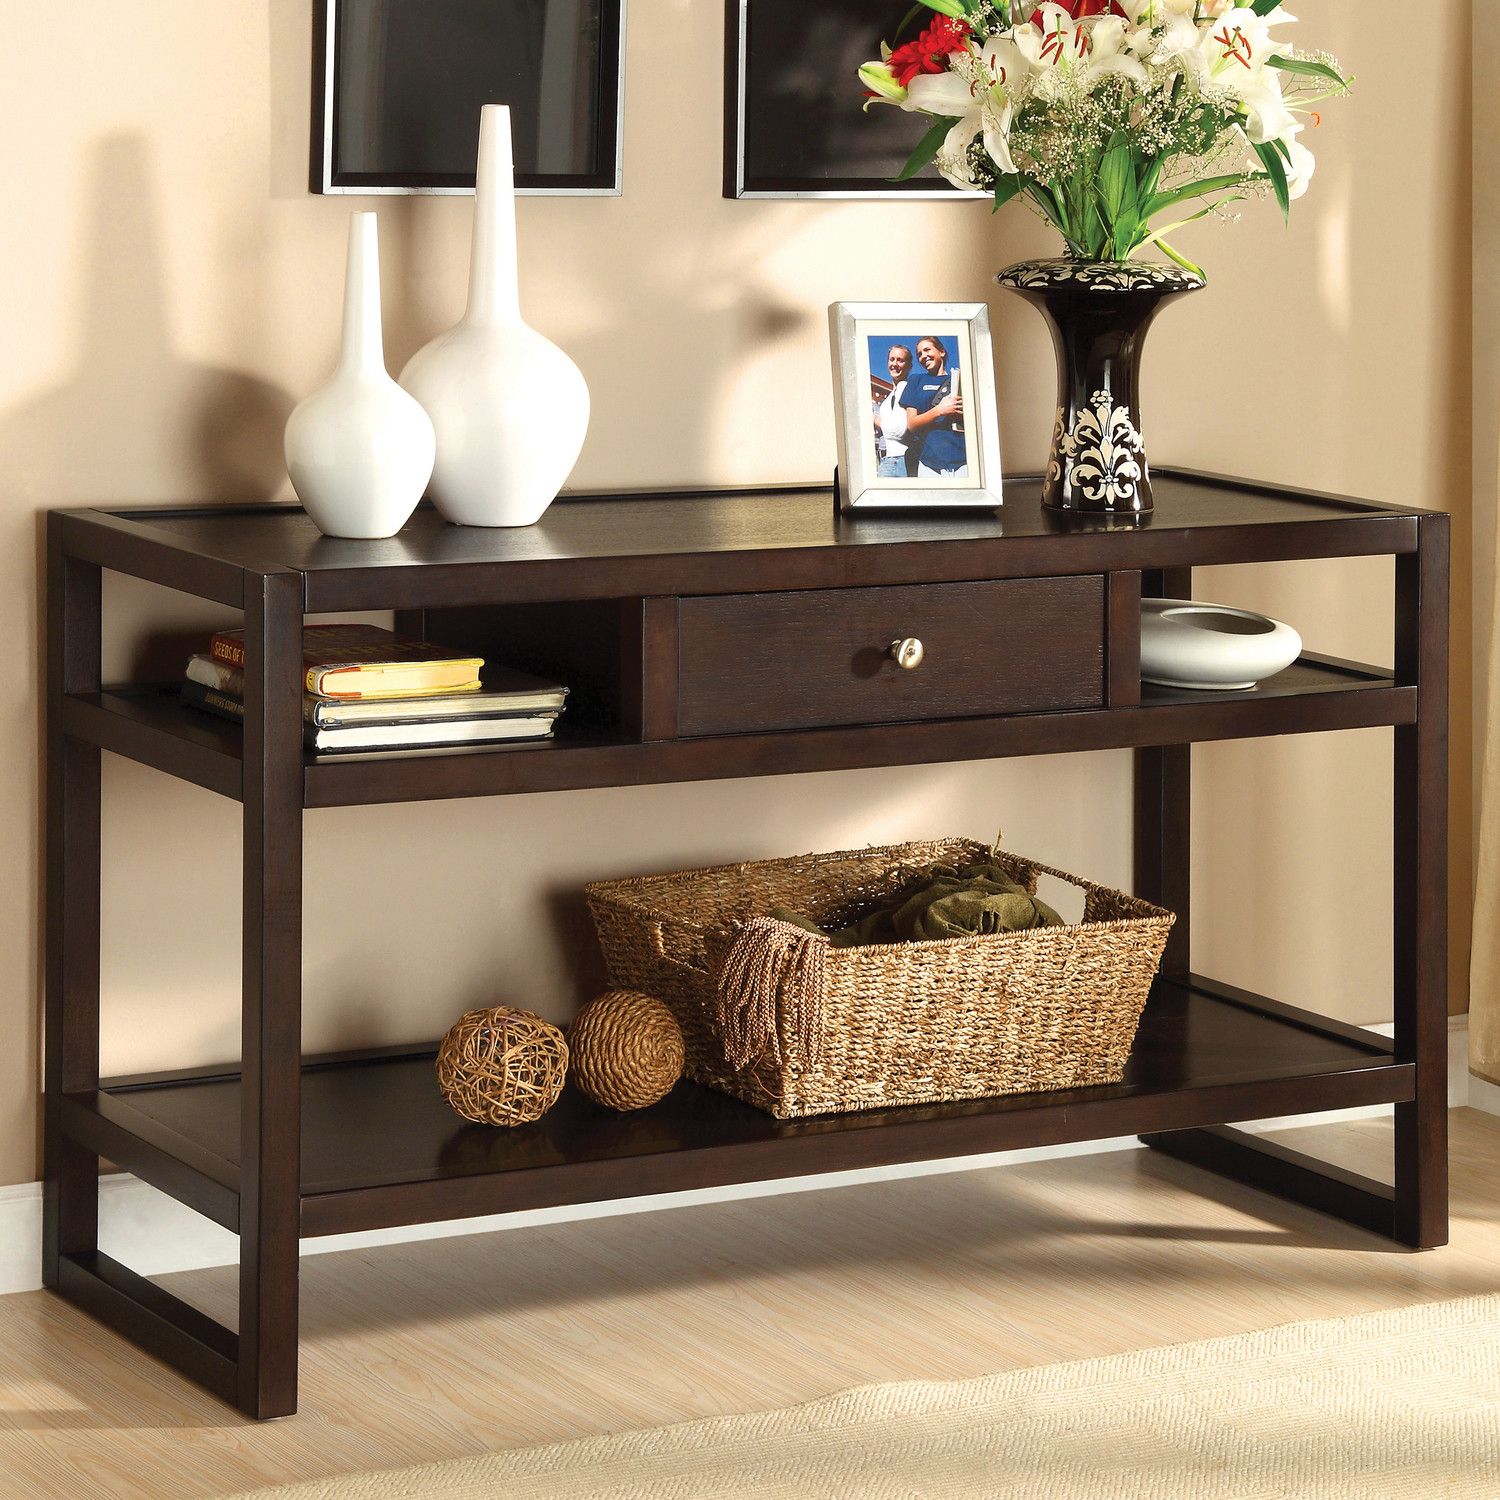 Between Wood And Glass Long Console Tables – Homesfeed With 3 Piece Shelf Console Tables (View 8 of 20)